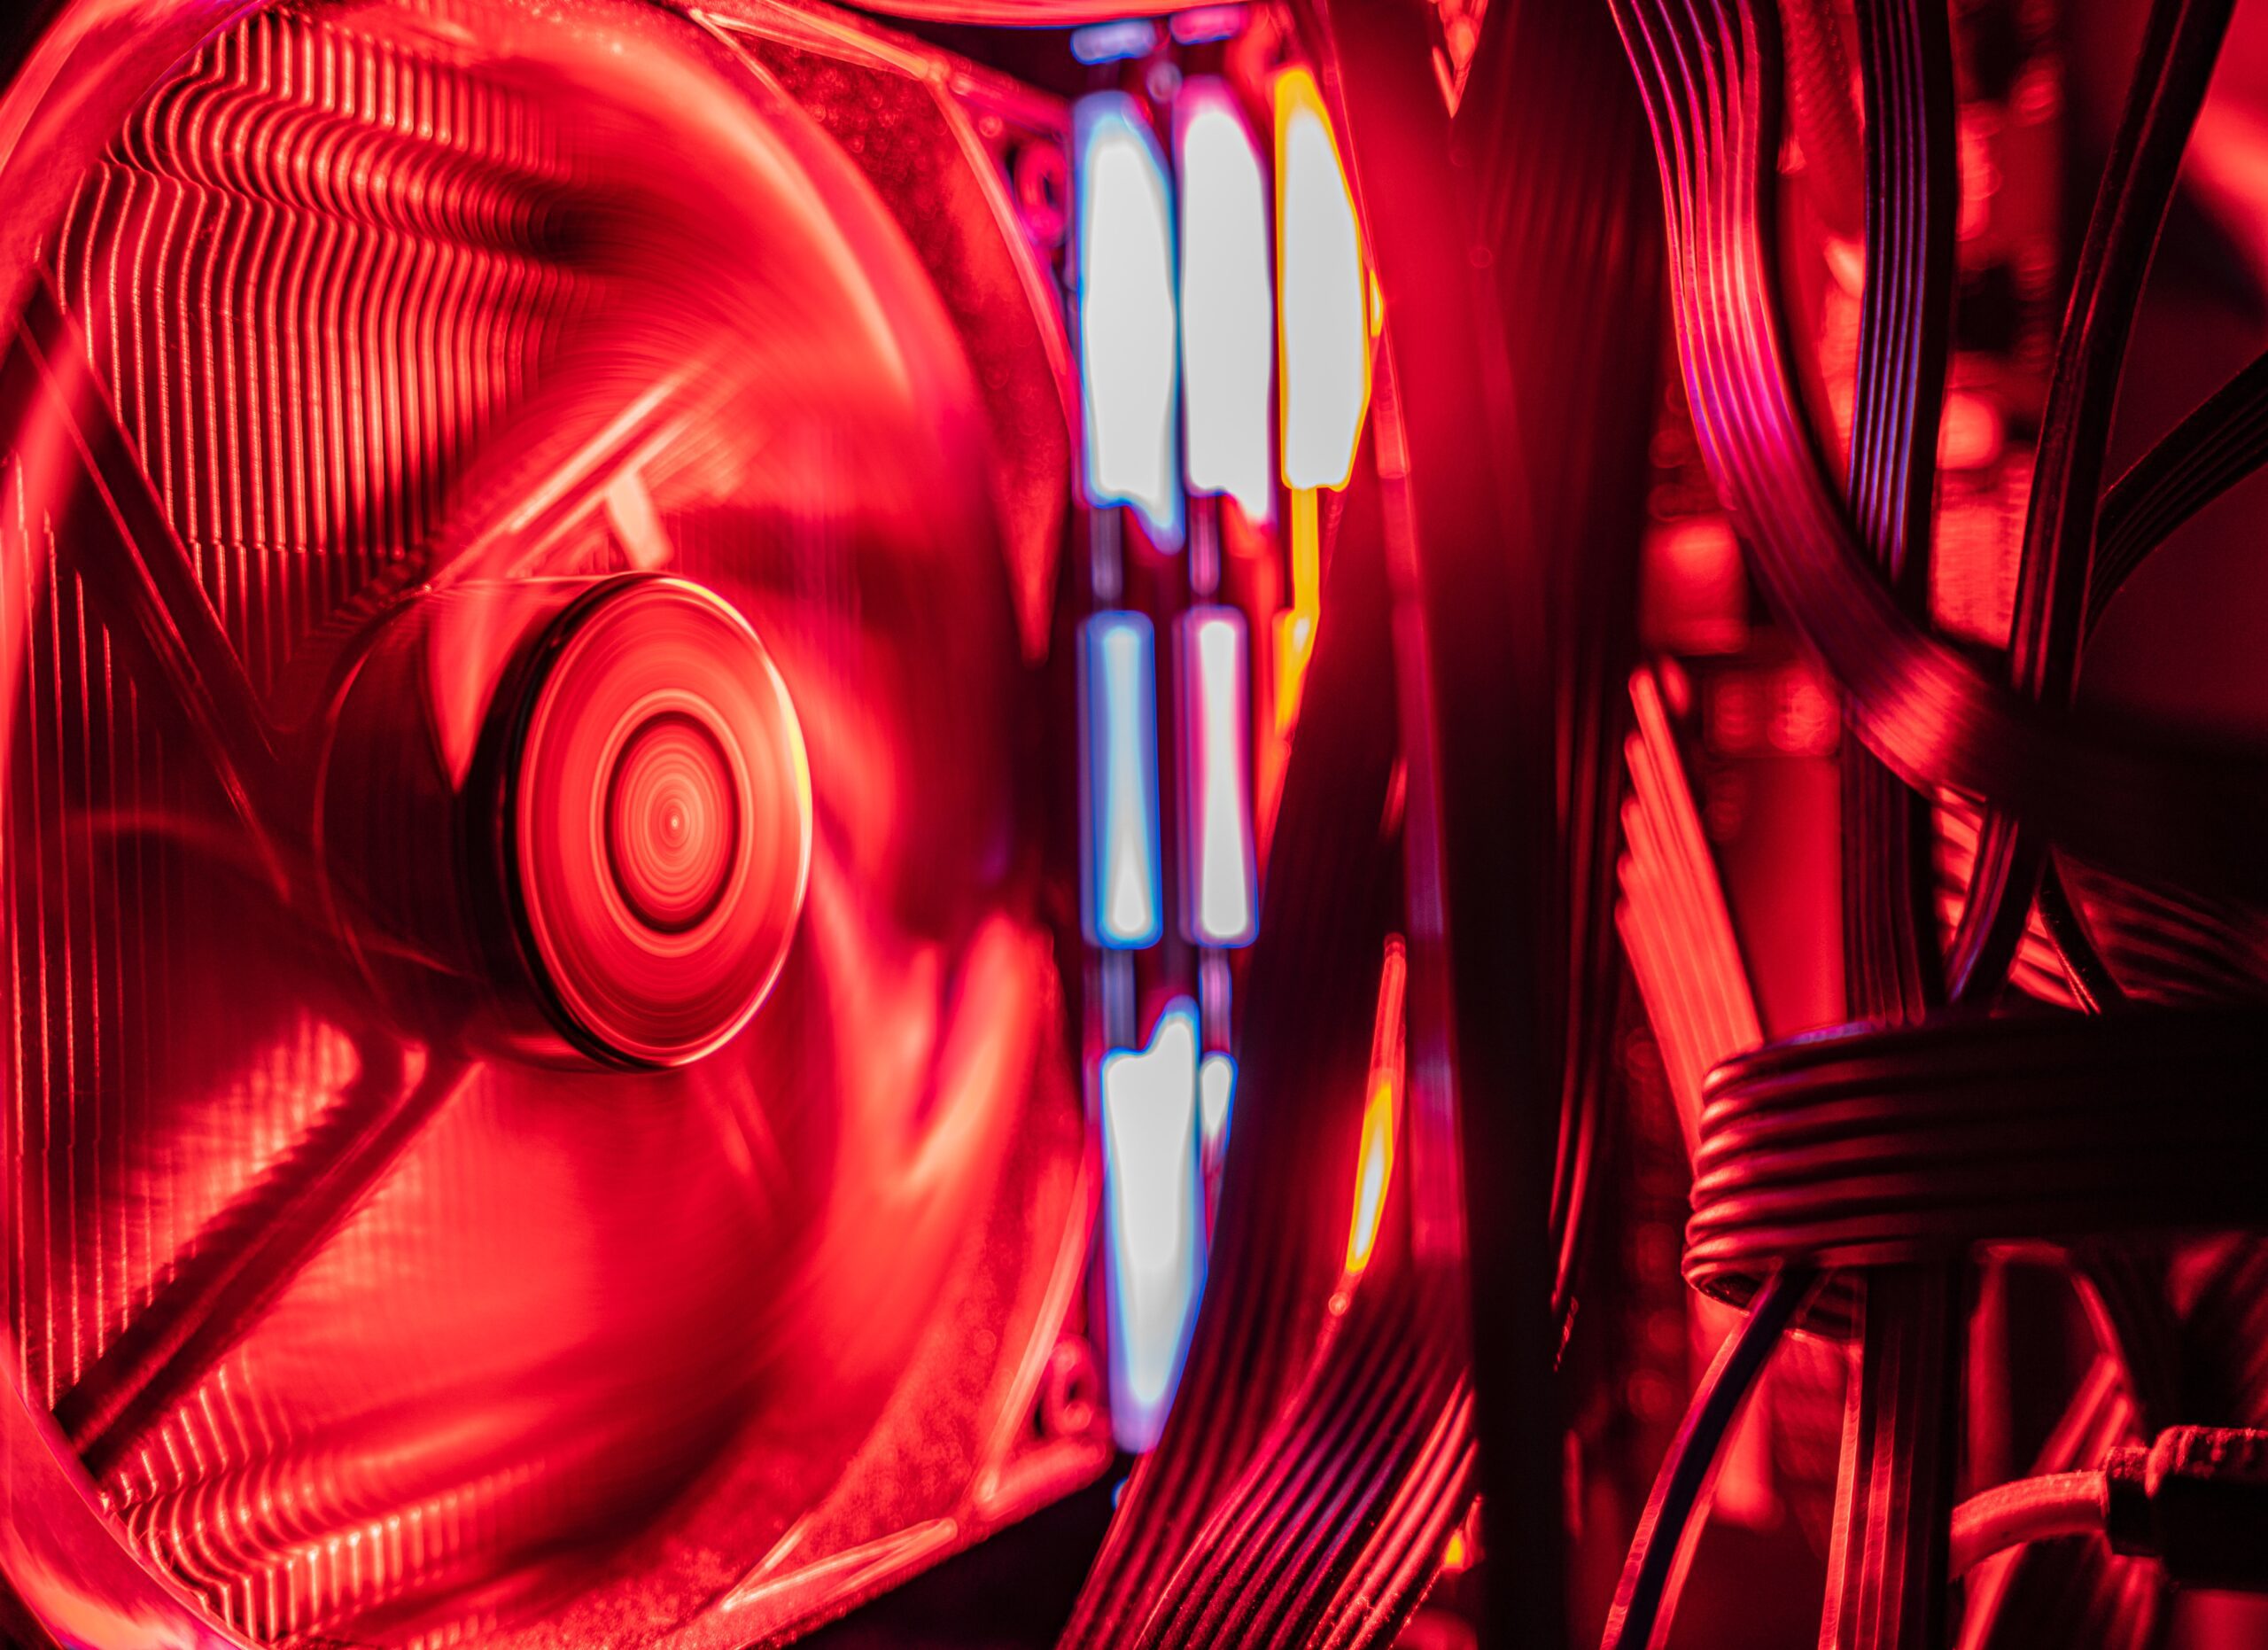 spinning fan image that has a filtered red hue  on Minnesota Computer Geek Web Page